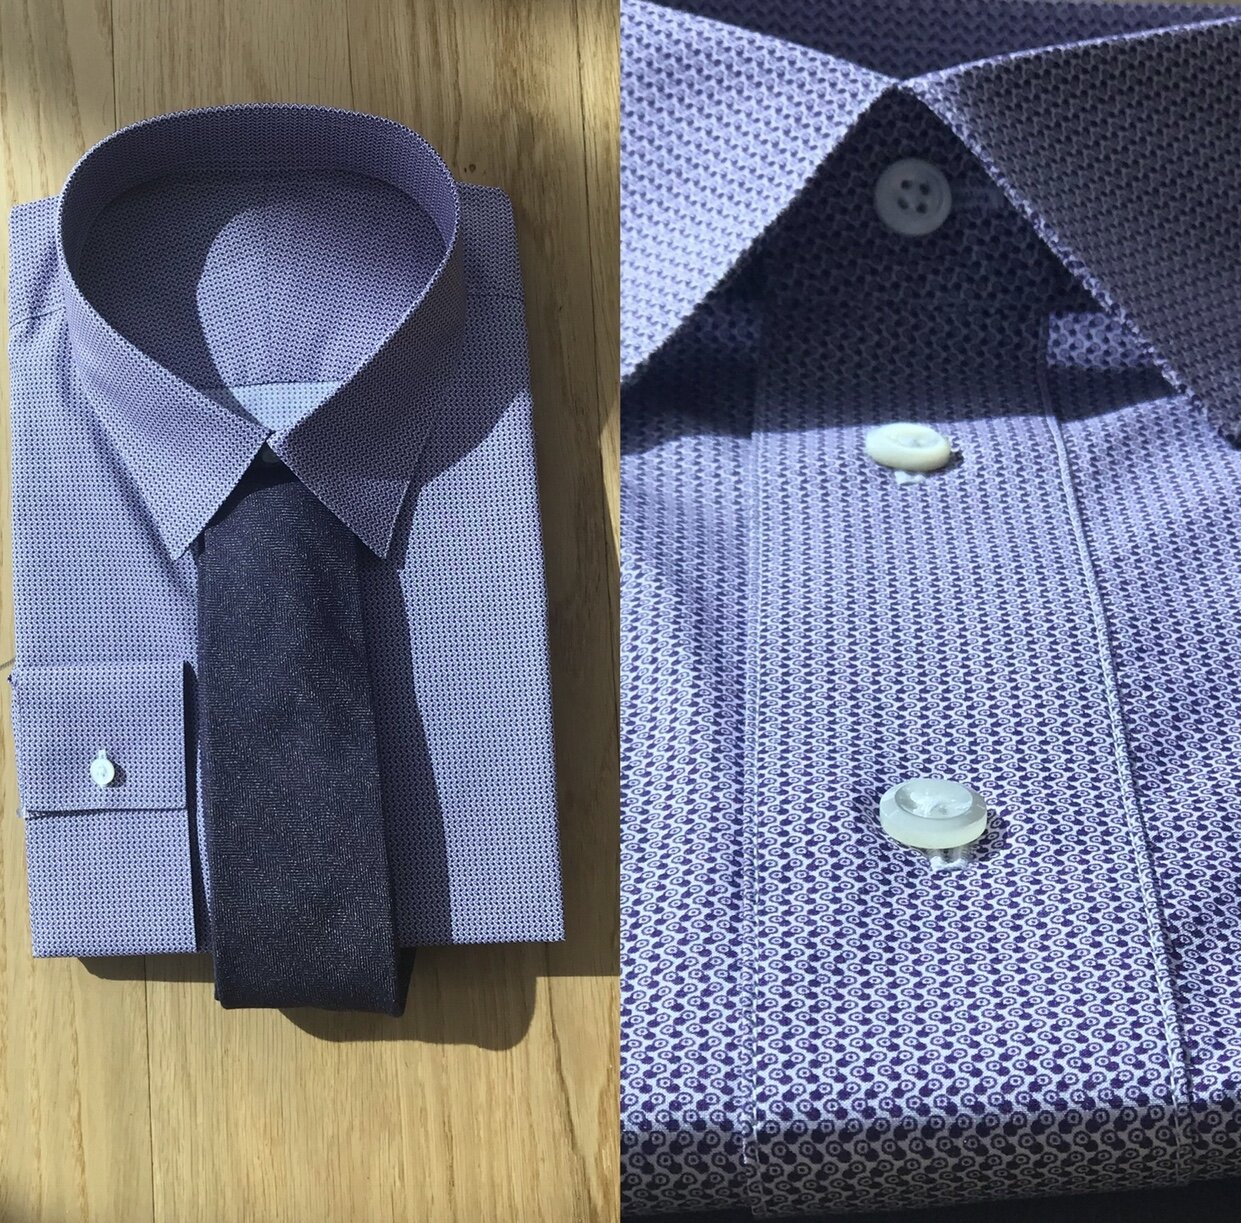 custom fit button up shirts